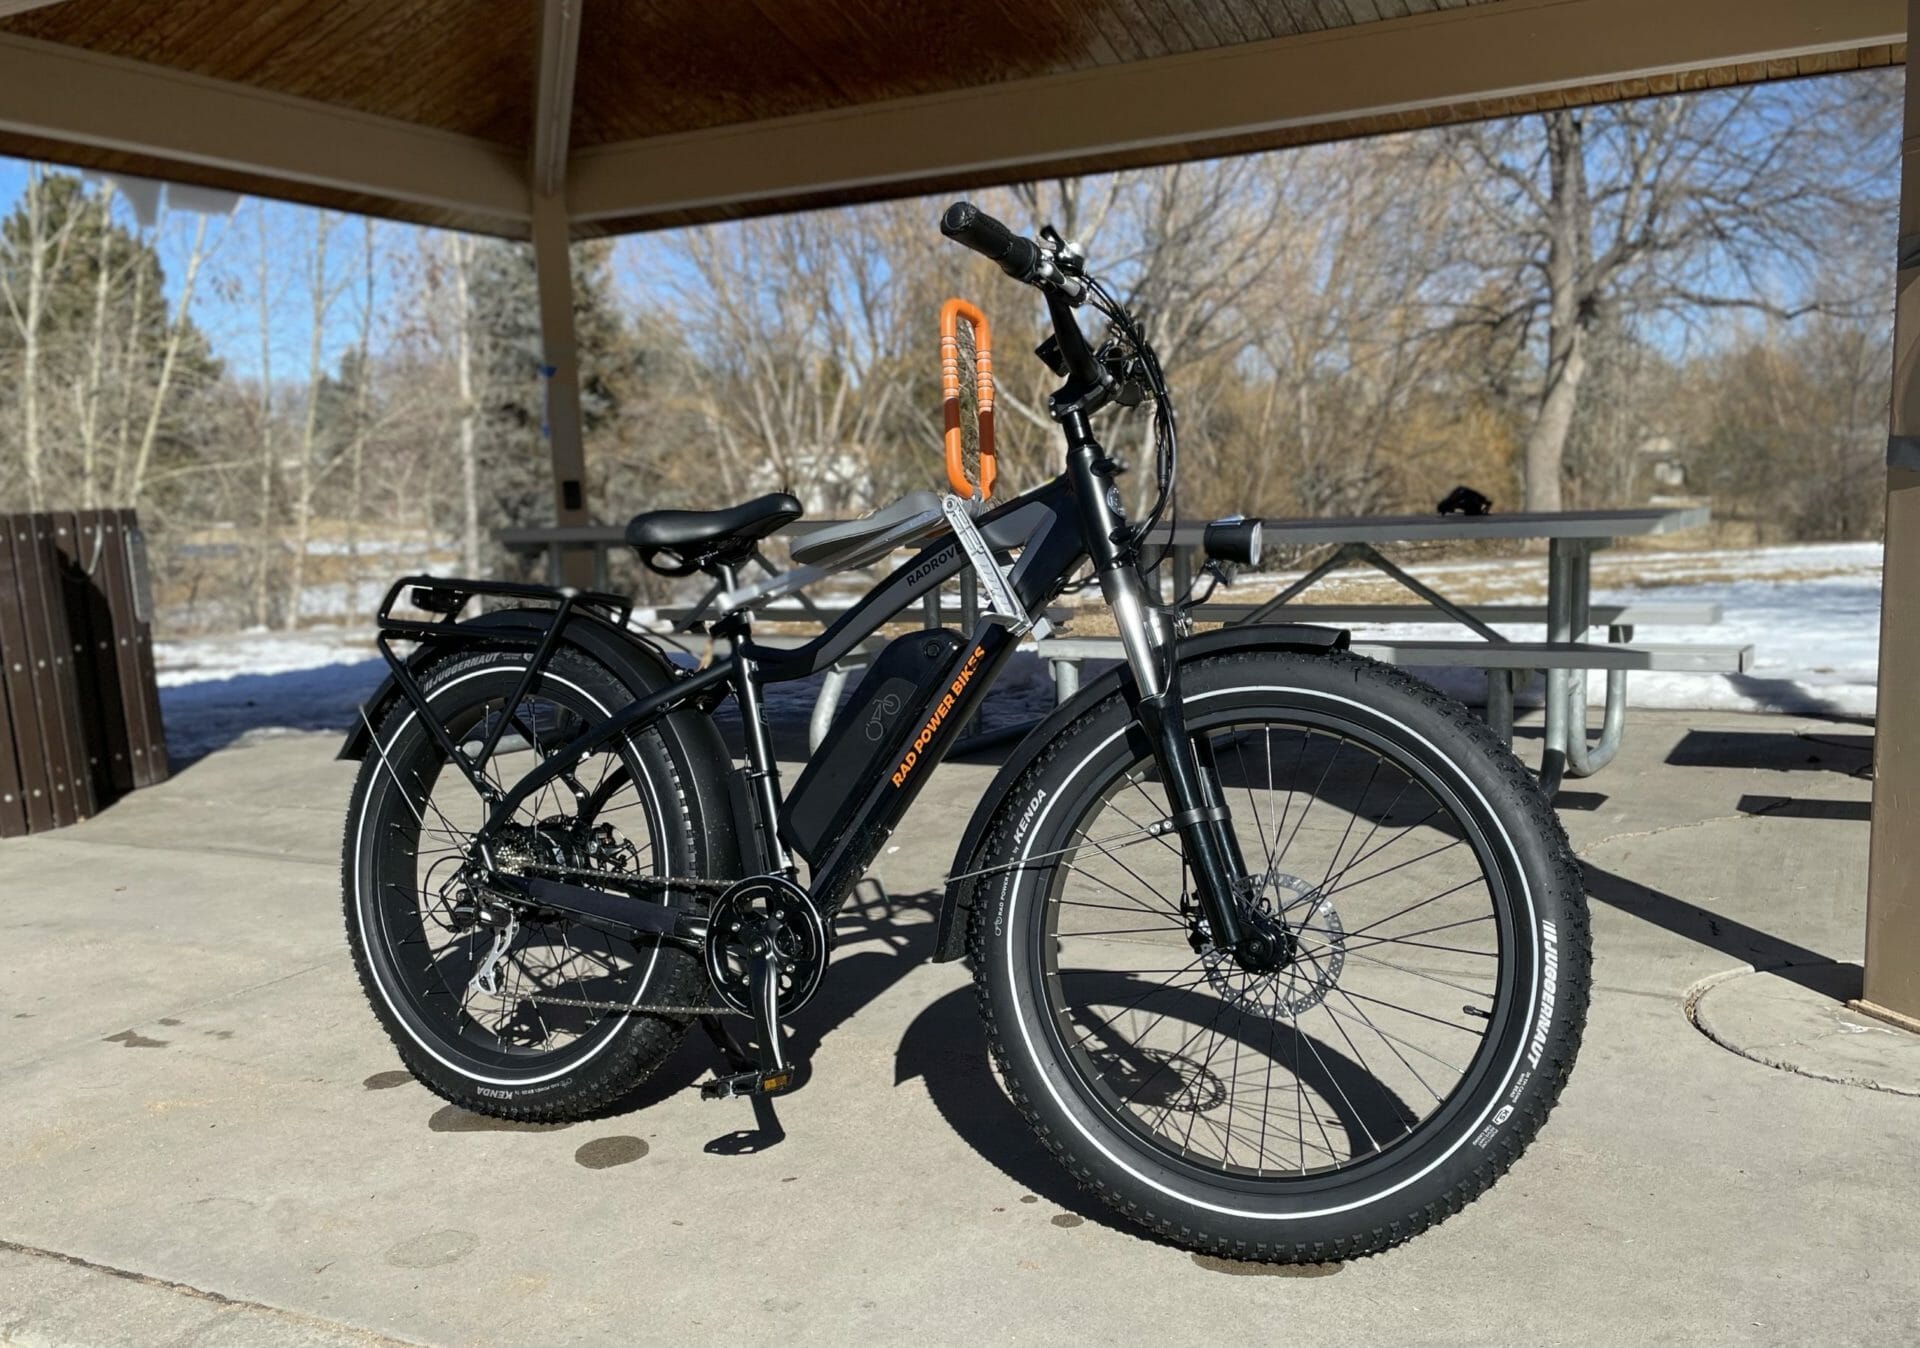 RadRover 6 Review: The Next Generation of the World's Best-Selling Fat Tire eBike 5